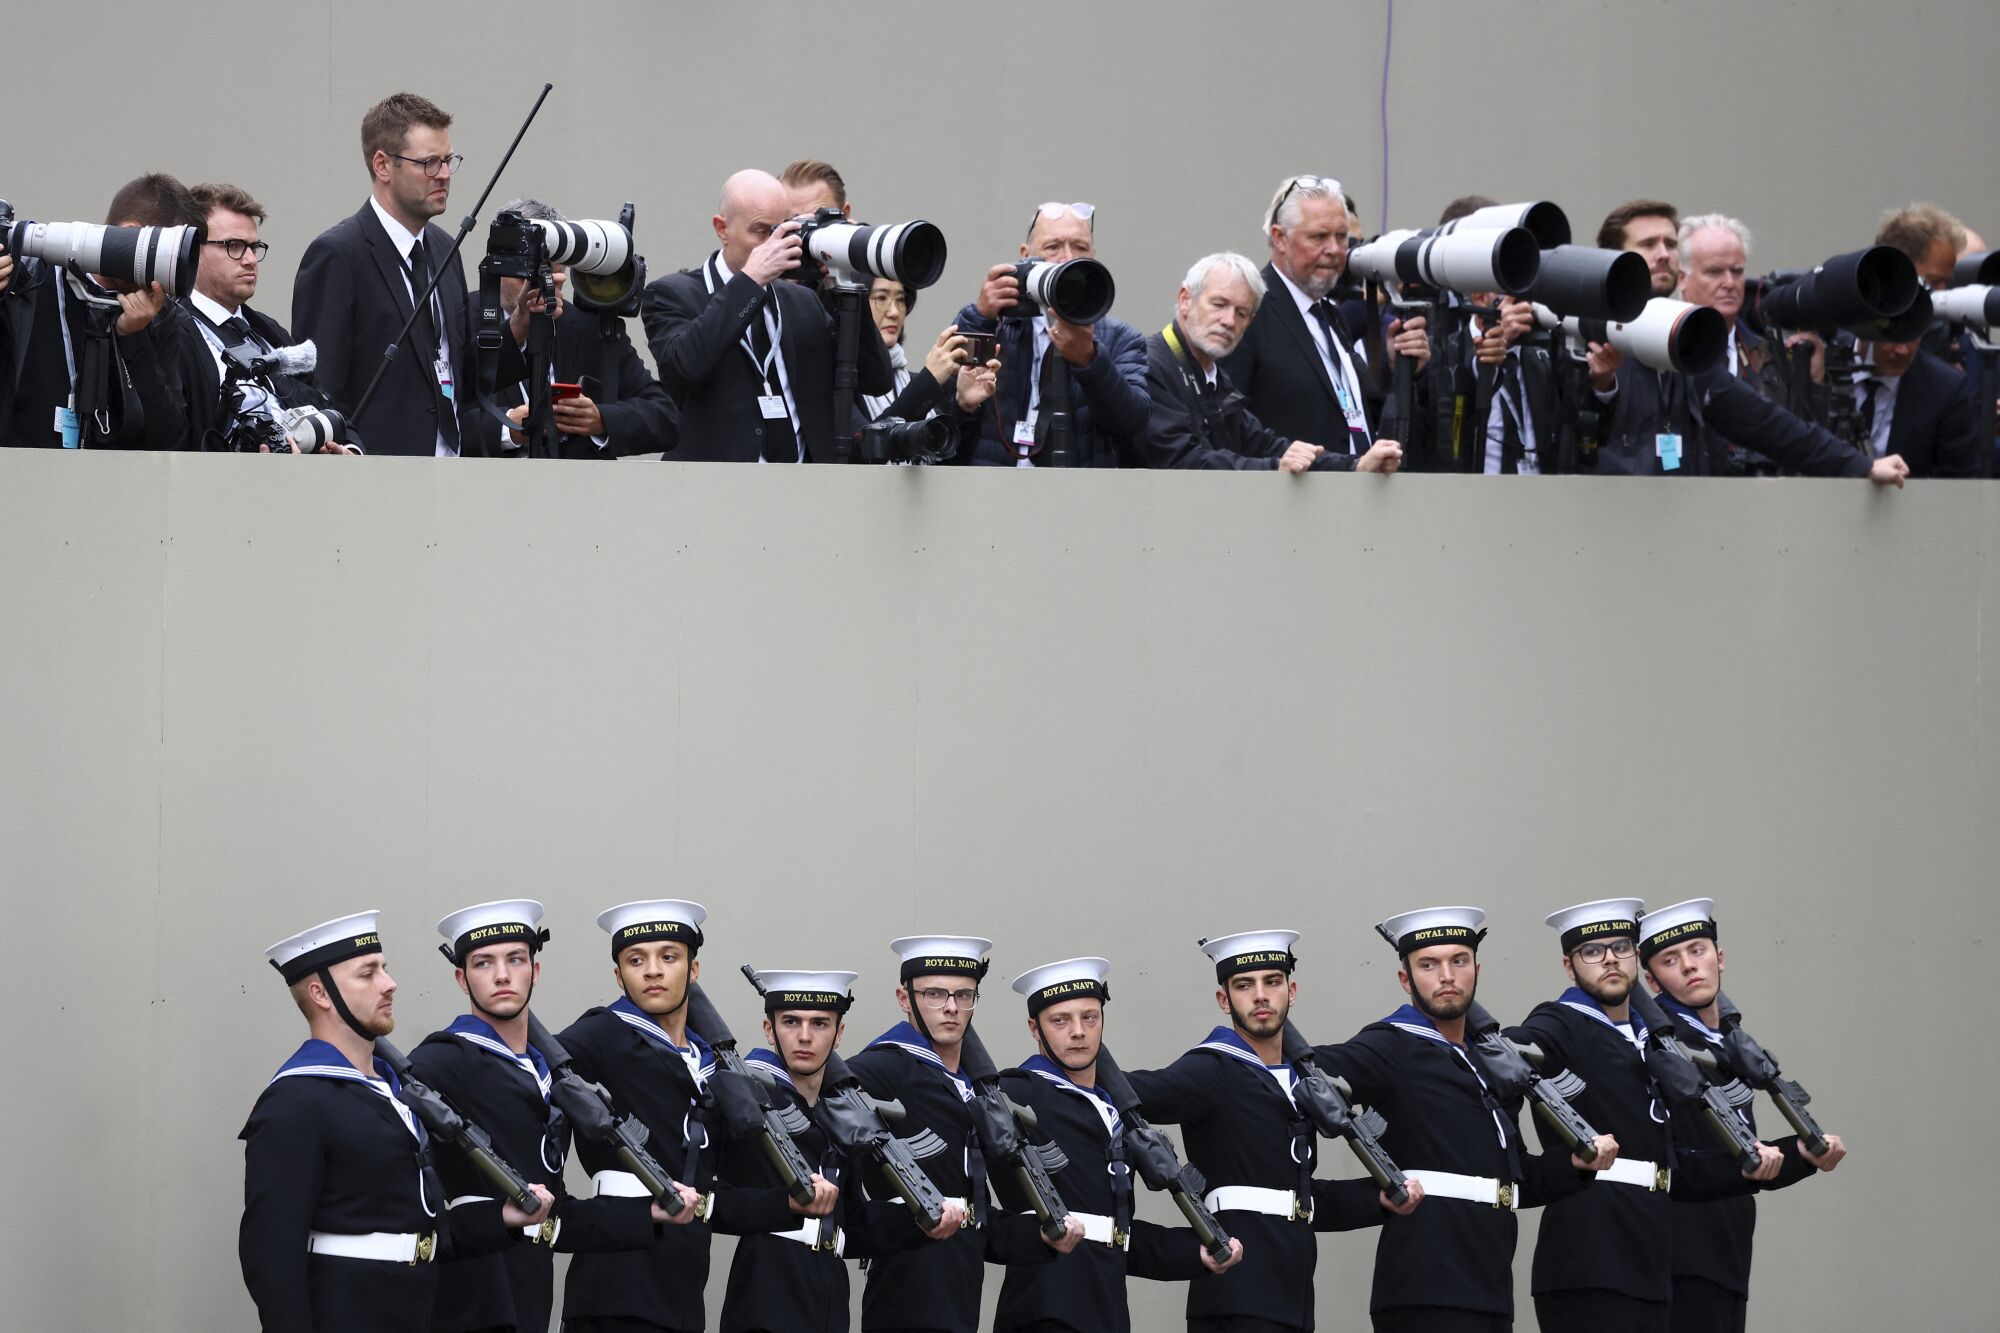 Members of the Royal Navy stand below the row of photographers. 